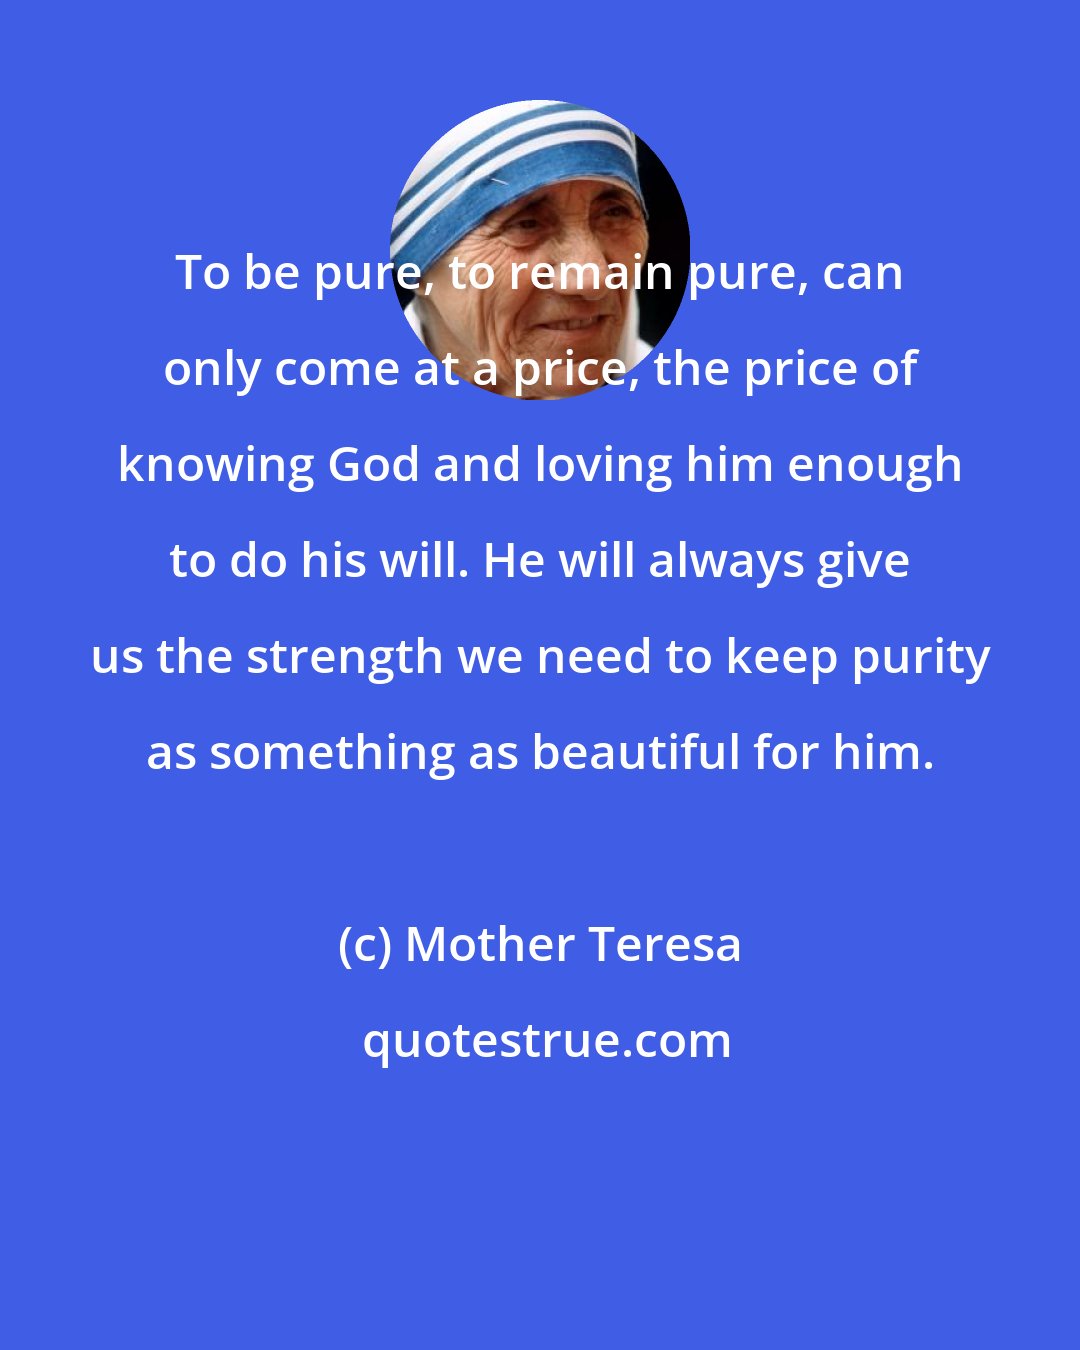 Mother Teresa: To be pure, to remain pure, can only come at a price, the price of knowing God and loving him enough to do his will. He will always give us the strength we need to keep purity as something as beautiful for him.